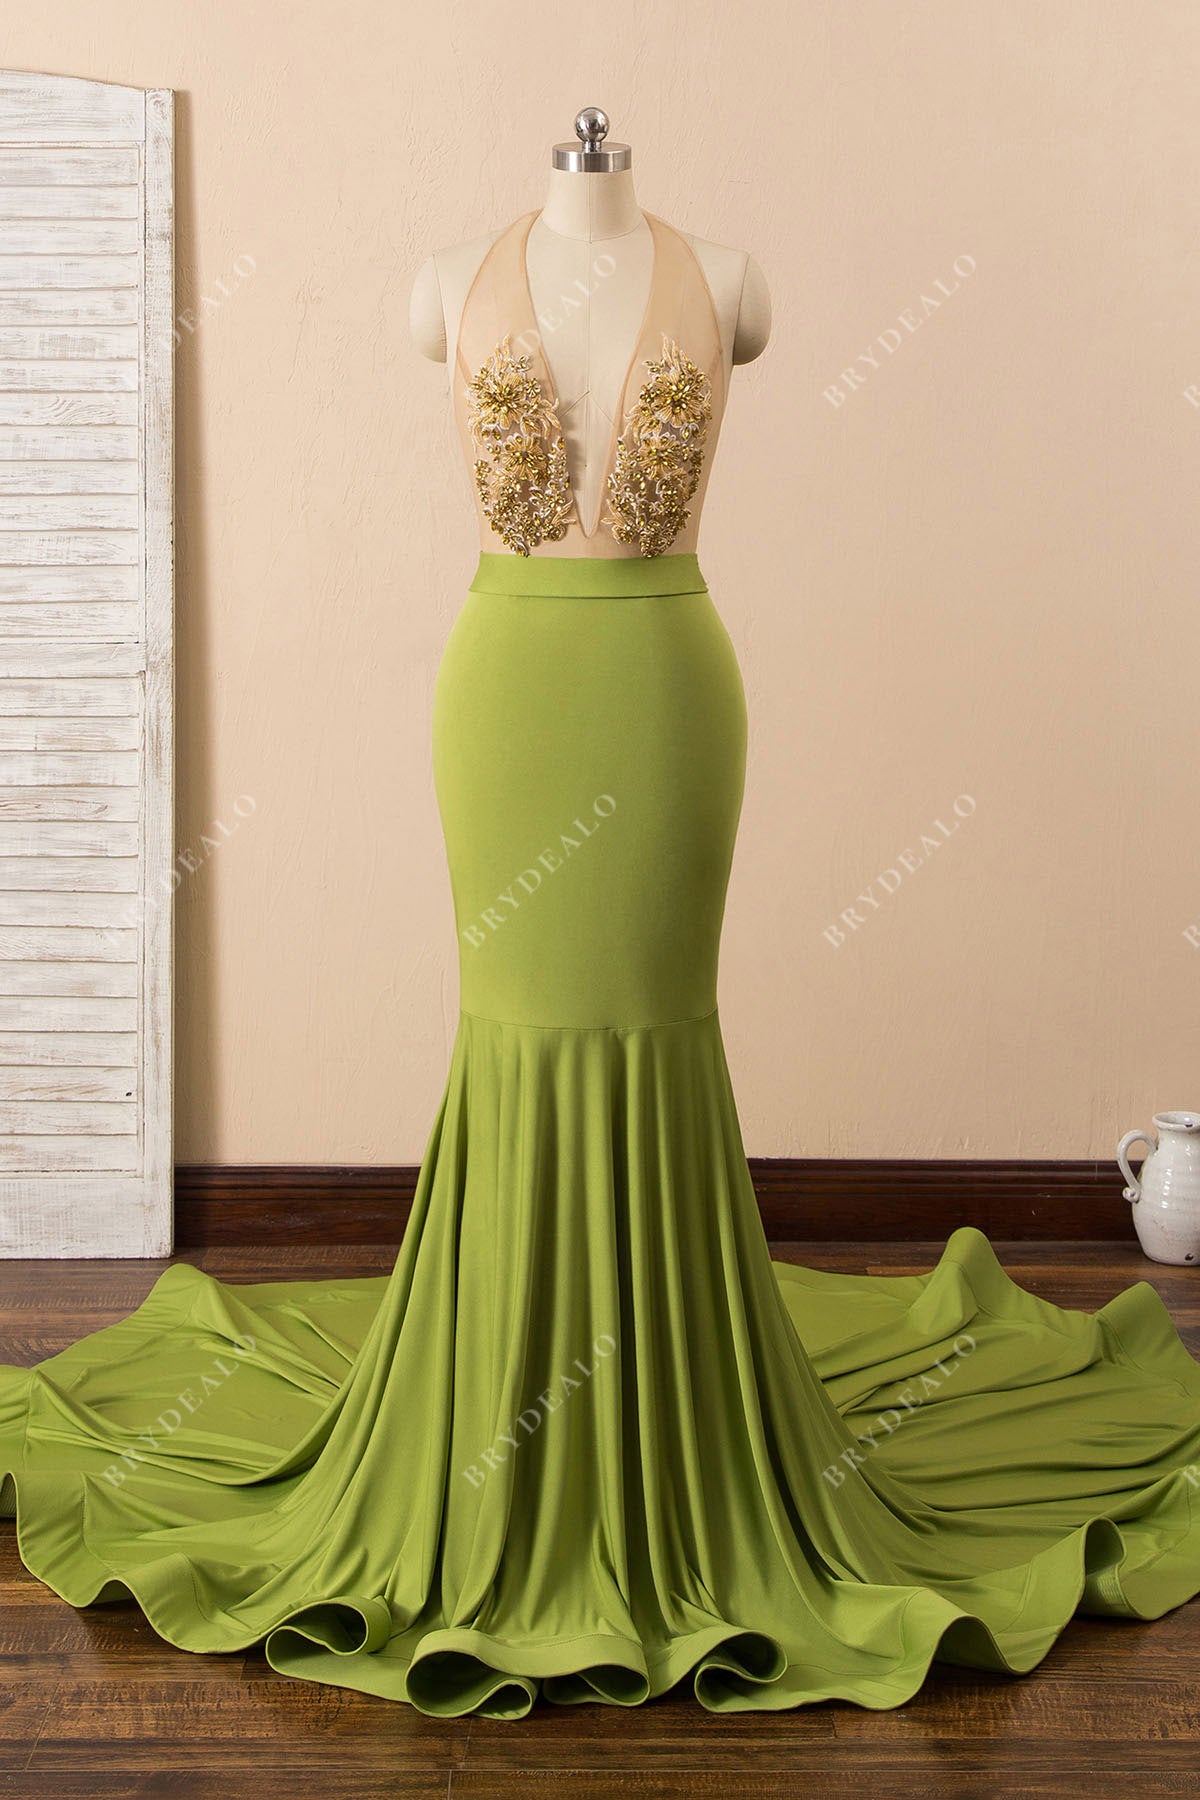 Gold Beaded Floral Applique Mermaid Prom Dress